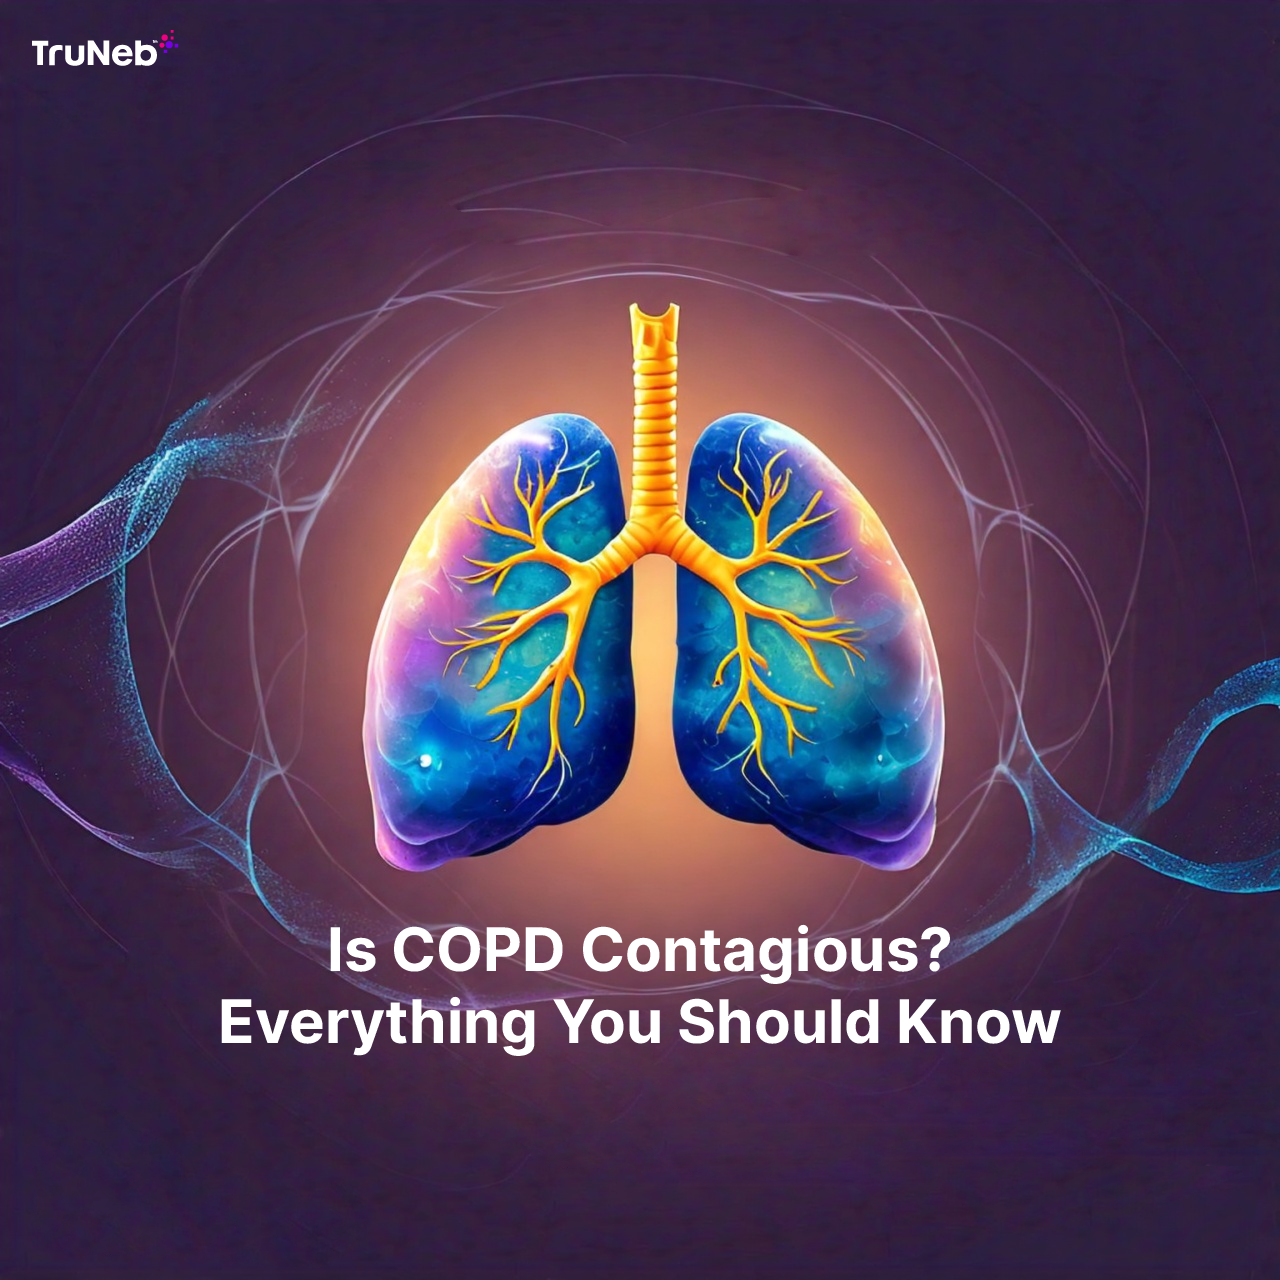 Is COPD Contagious? Everything You Should Know.